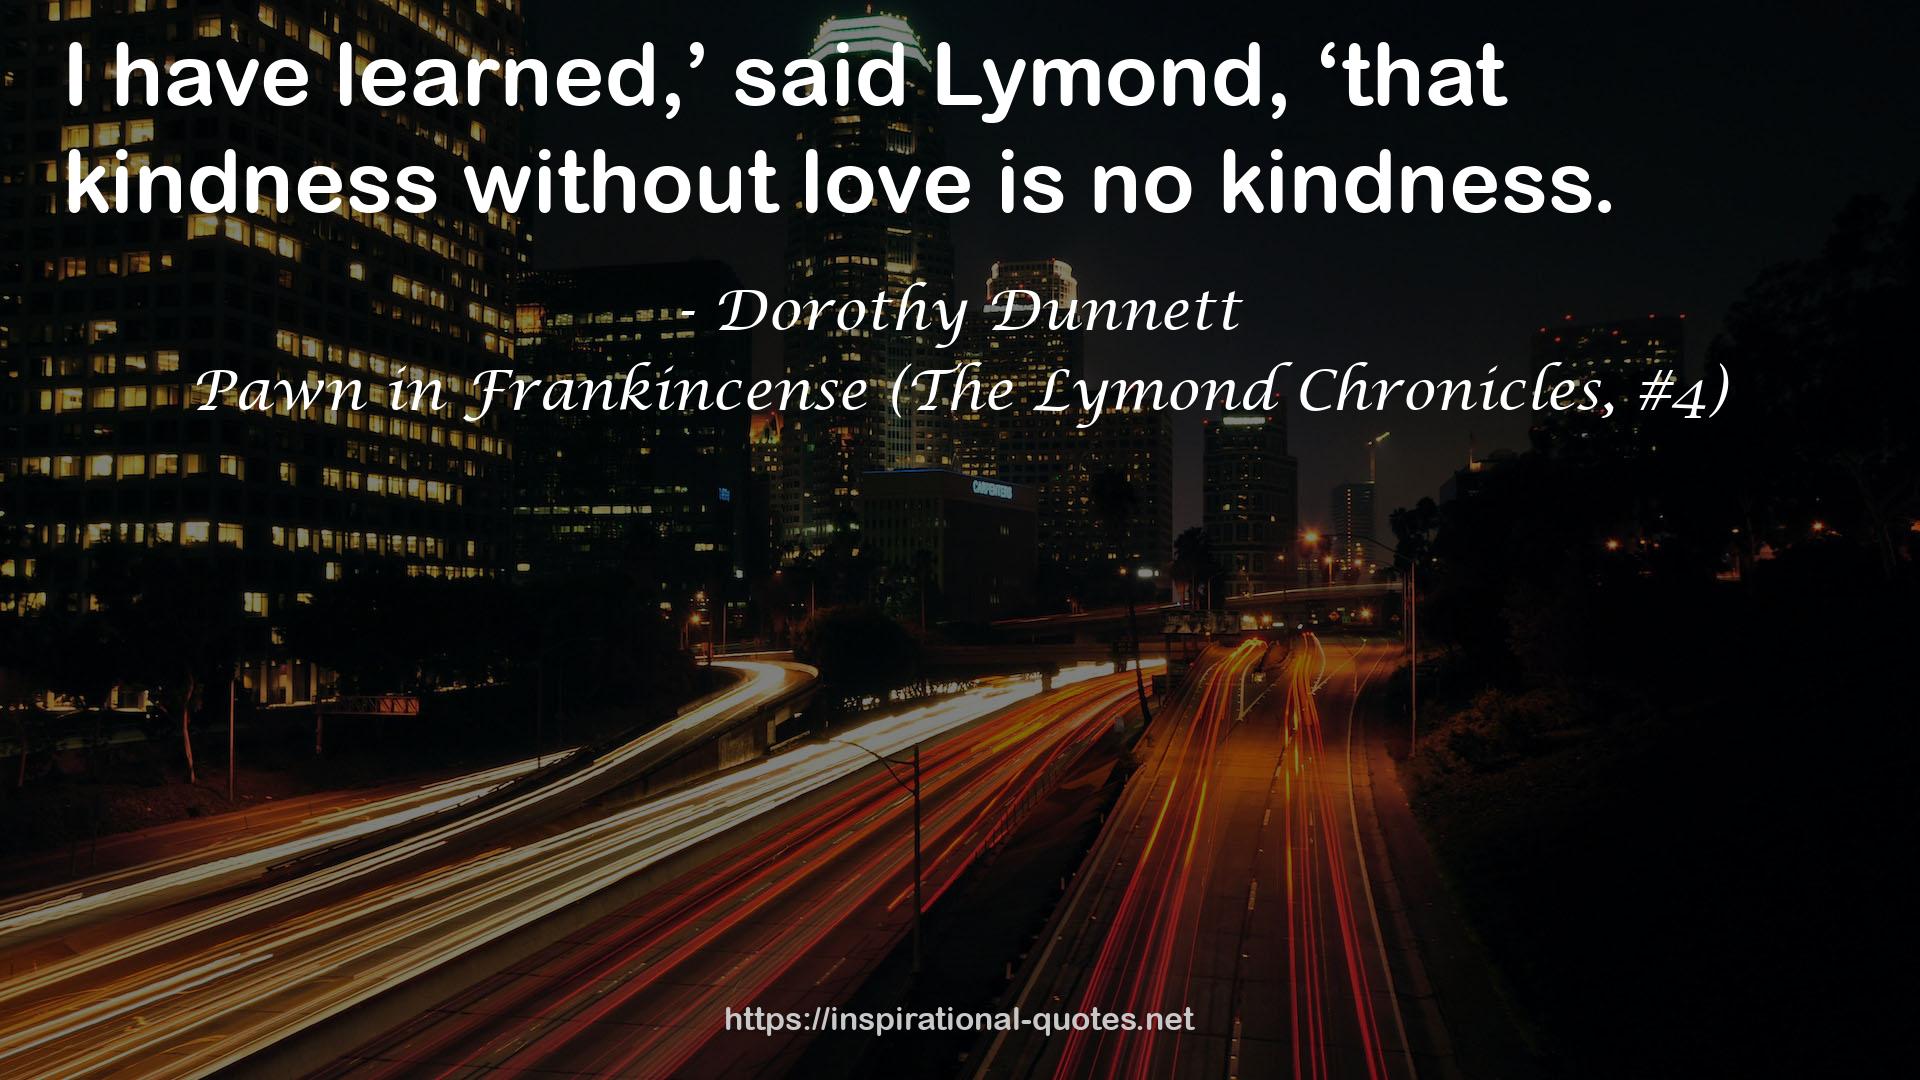 Pawn in Frankincense (The Lymond Chronicles, #4) QUOTES